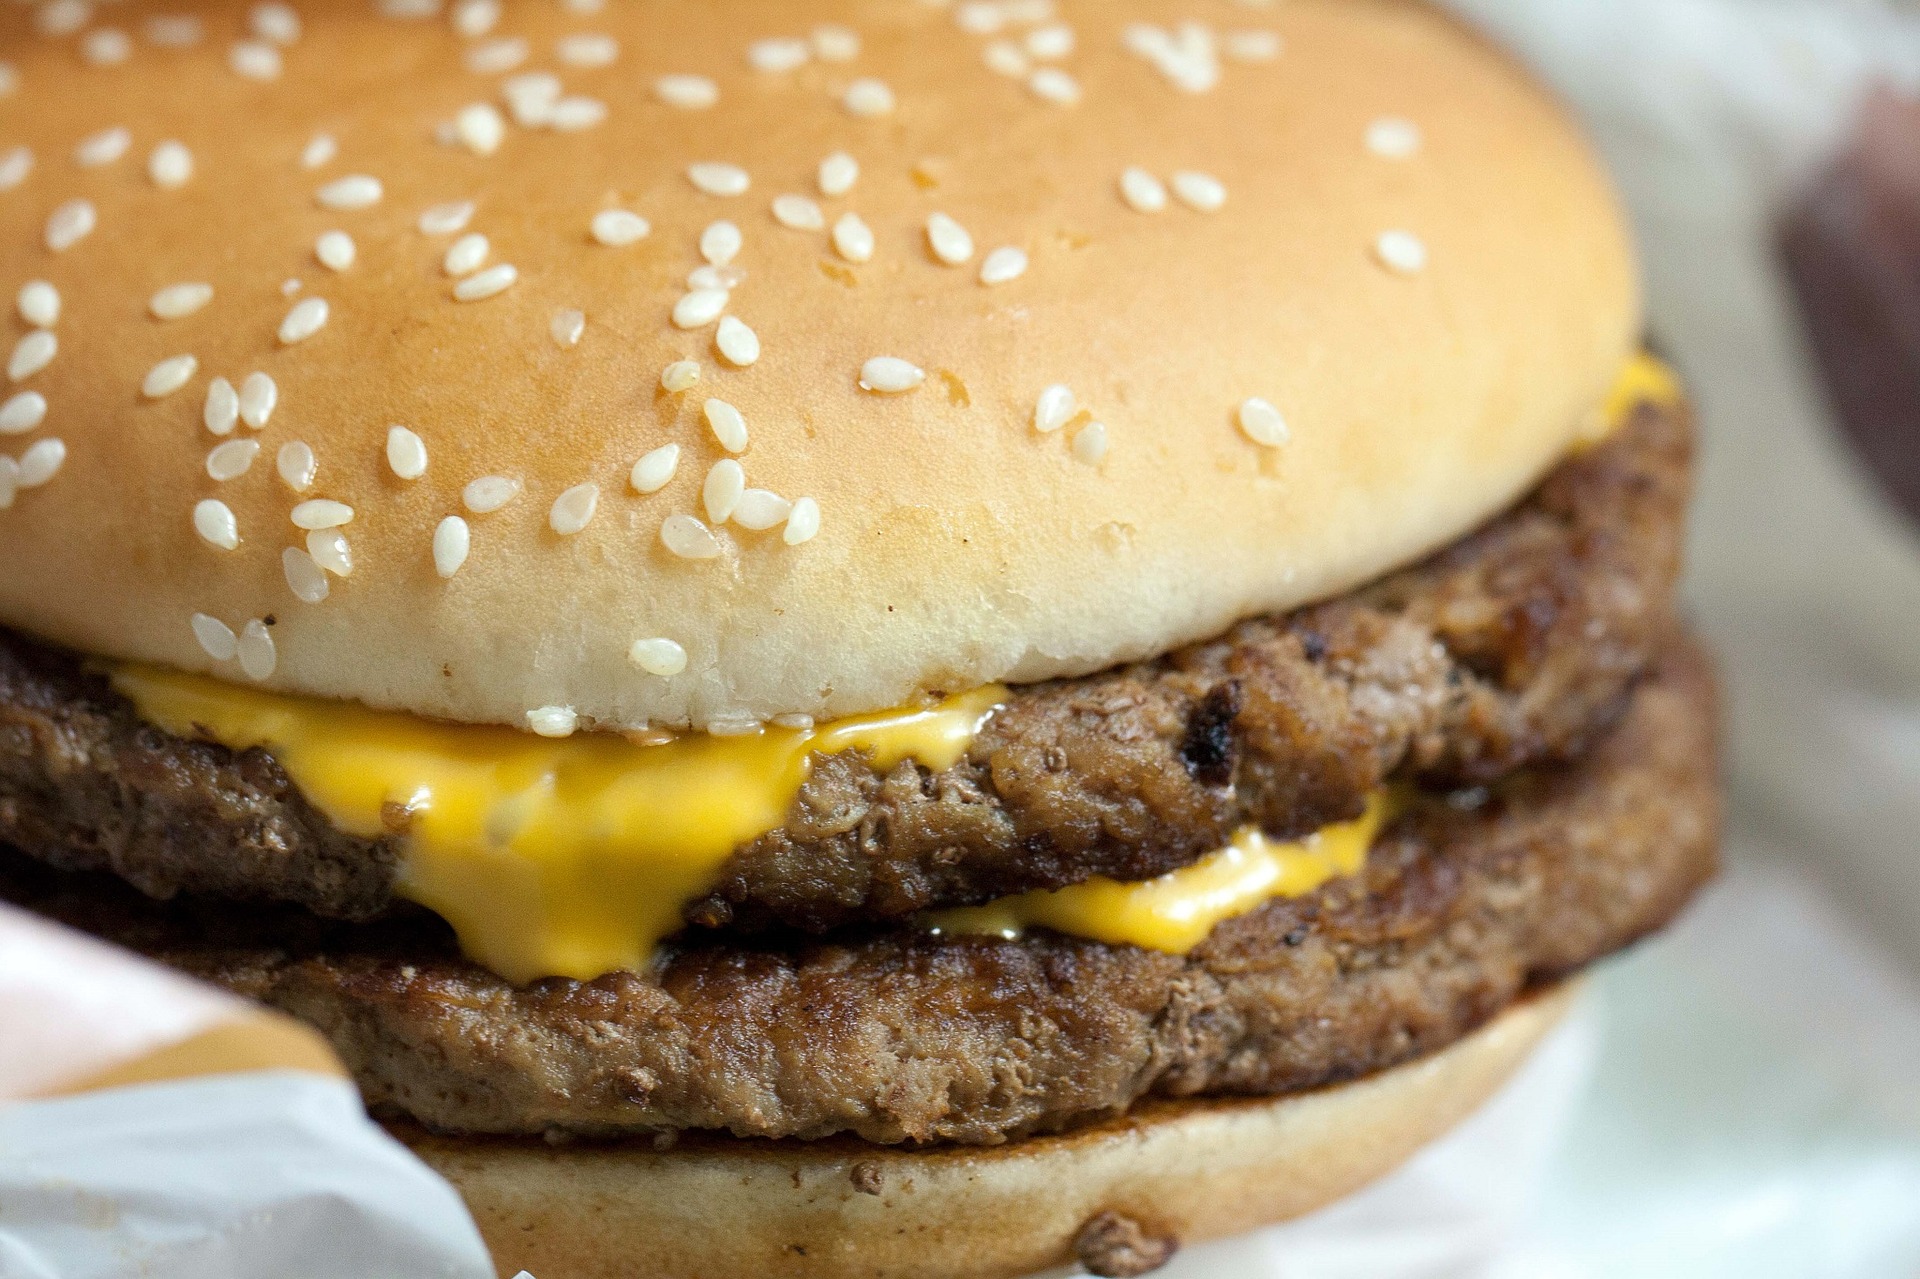 This Is What Happens To Your Body When You Eat Fast Food